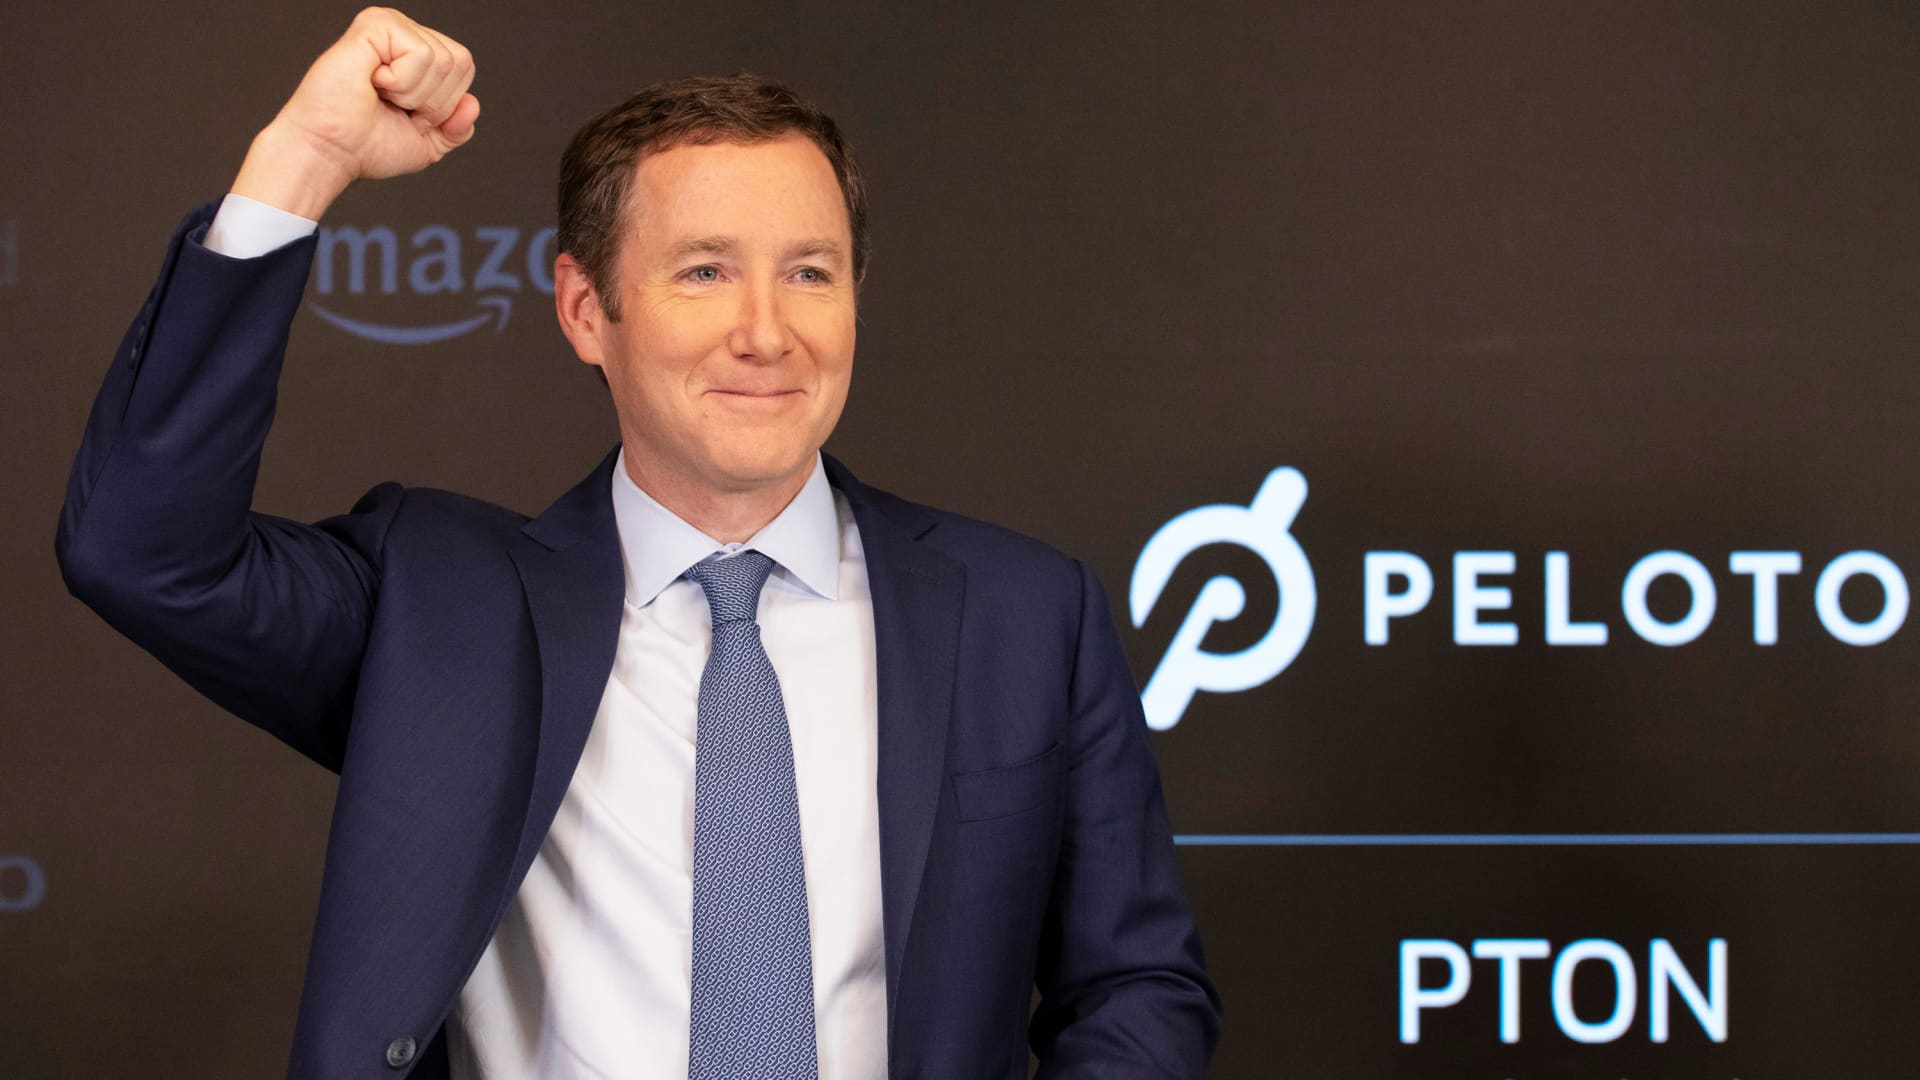 Peloton CEO John Foley celebrates at the Nasdaq MarketSite before the opening bell and his company's IPO, Thursday, Sept. 26, 2019 in New York.